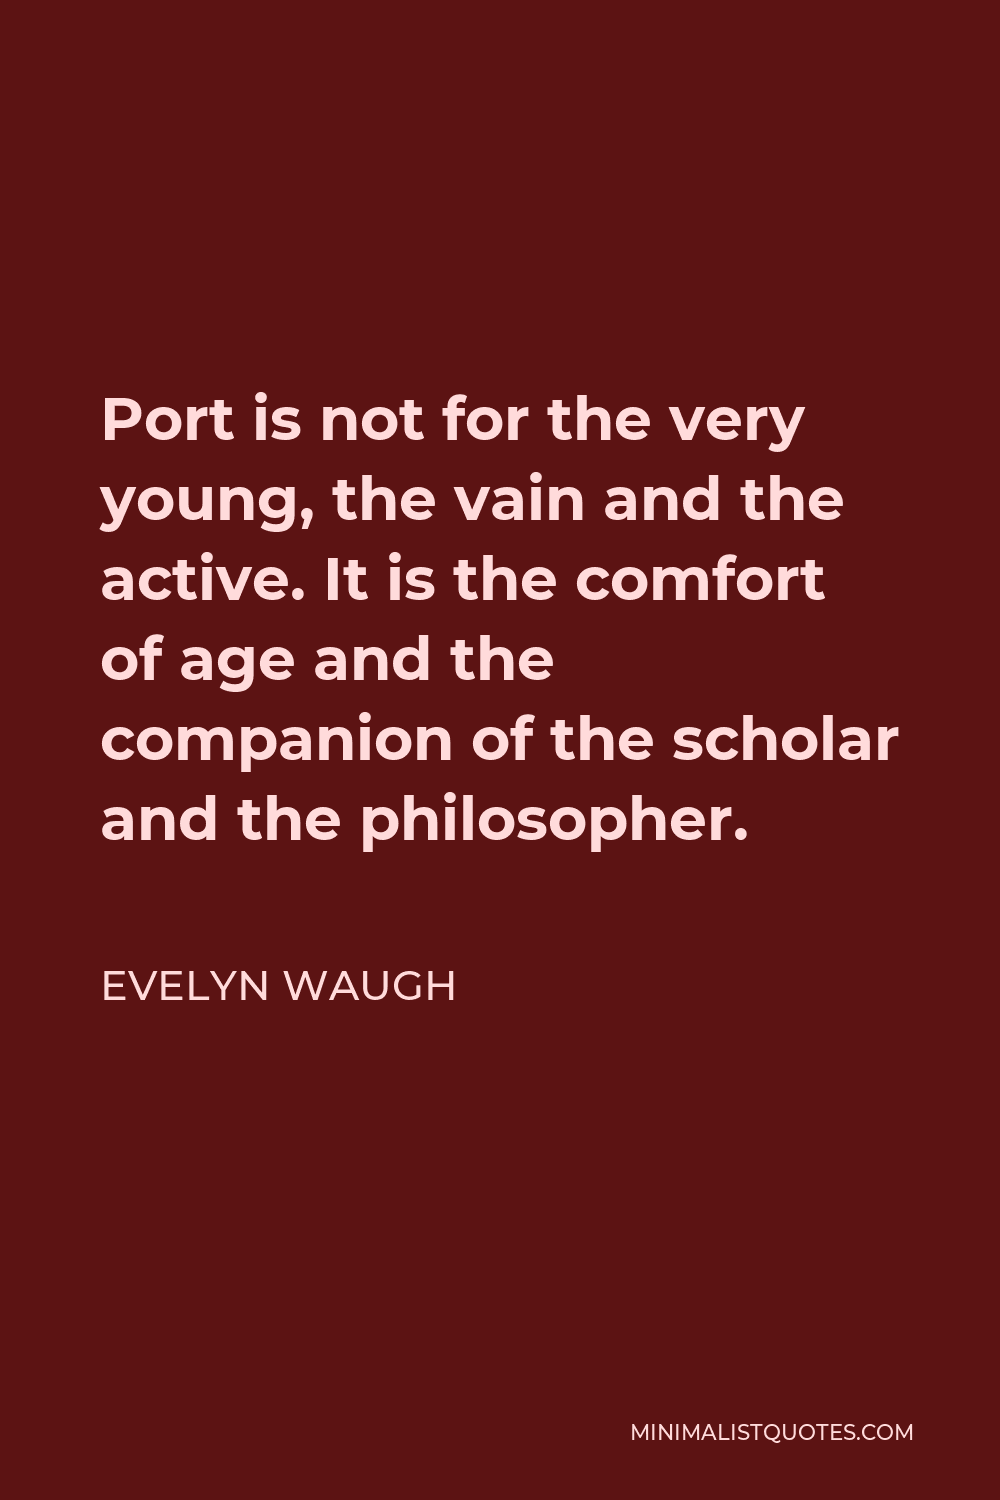 Evelyn Waugh Quote - Port is not for the very young, the vain and the active. It is the comfort of age and the companion of the scholar and the philosopher.